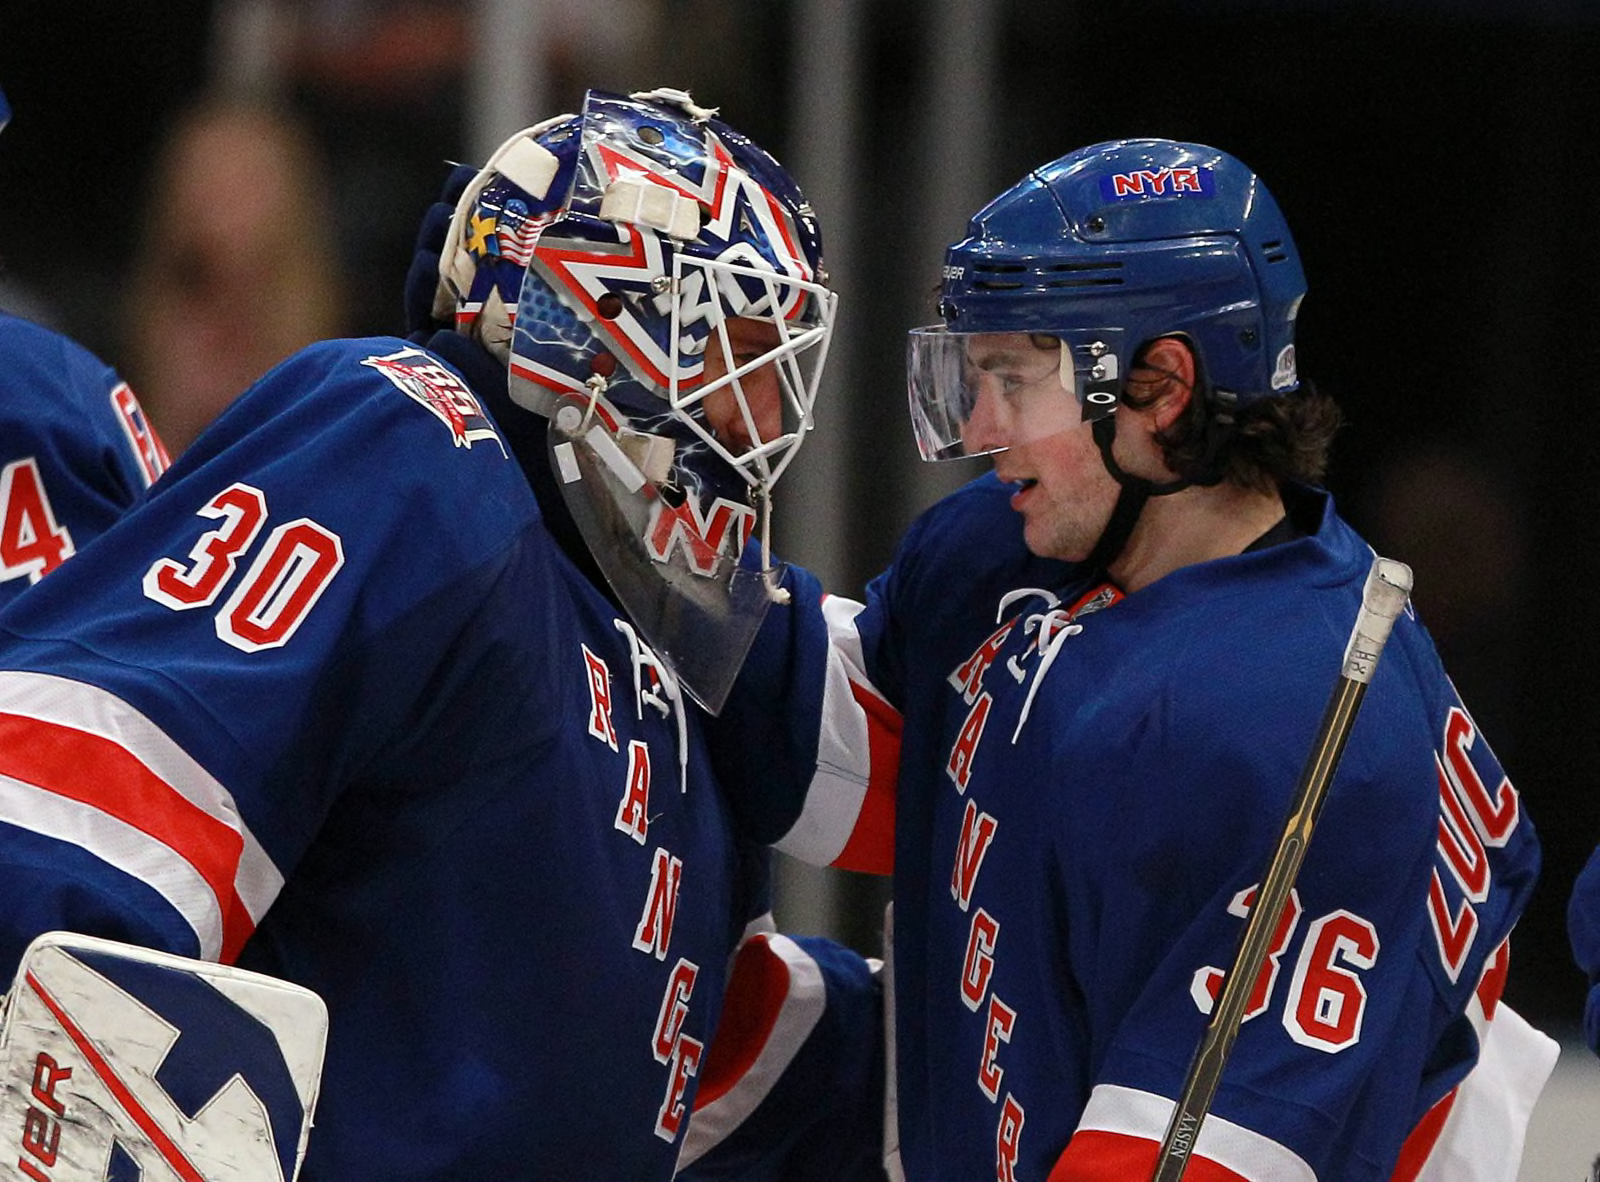 Lundqvist called Mats Zuccarello his “annoying little brother